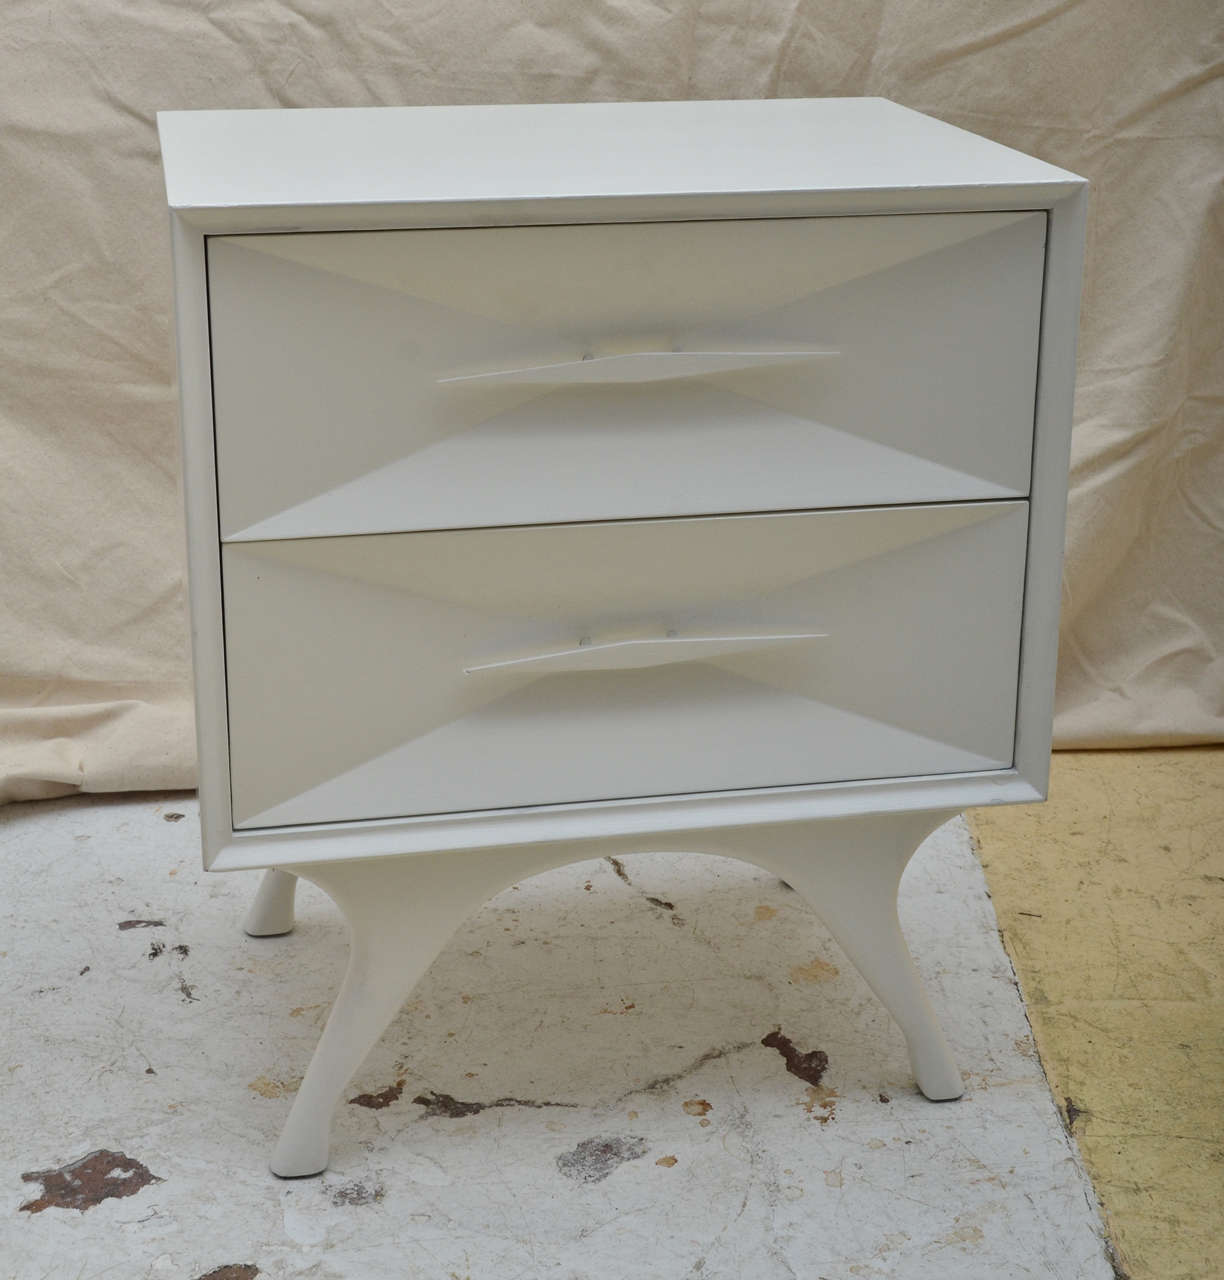 Pair White Painted 1960 American Mid Century Modern Bedside Tables Raised on 4 Splayed Legs. The Drawer Fronts Form An Inverted Pyramid Design, Centered by Narrow wood Pulls. Stamped on Bottom of Drawer Is a Circle With BDB in A Triangular